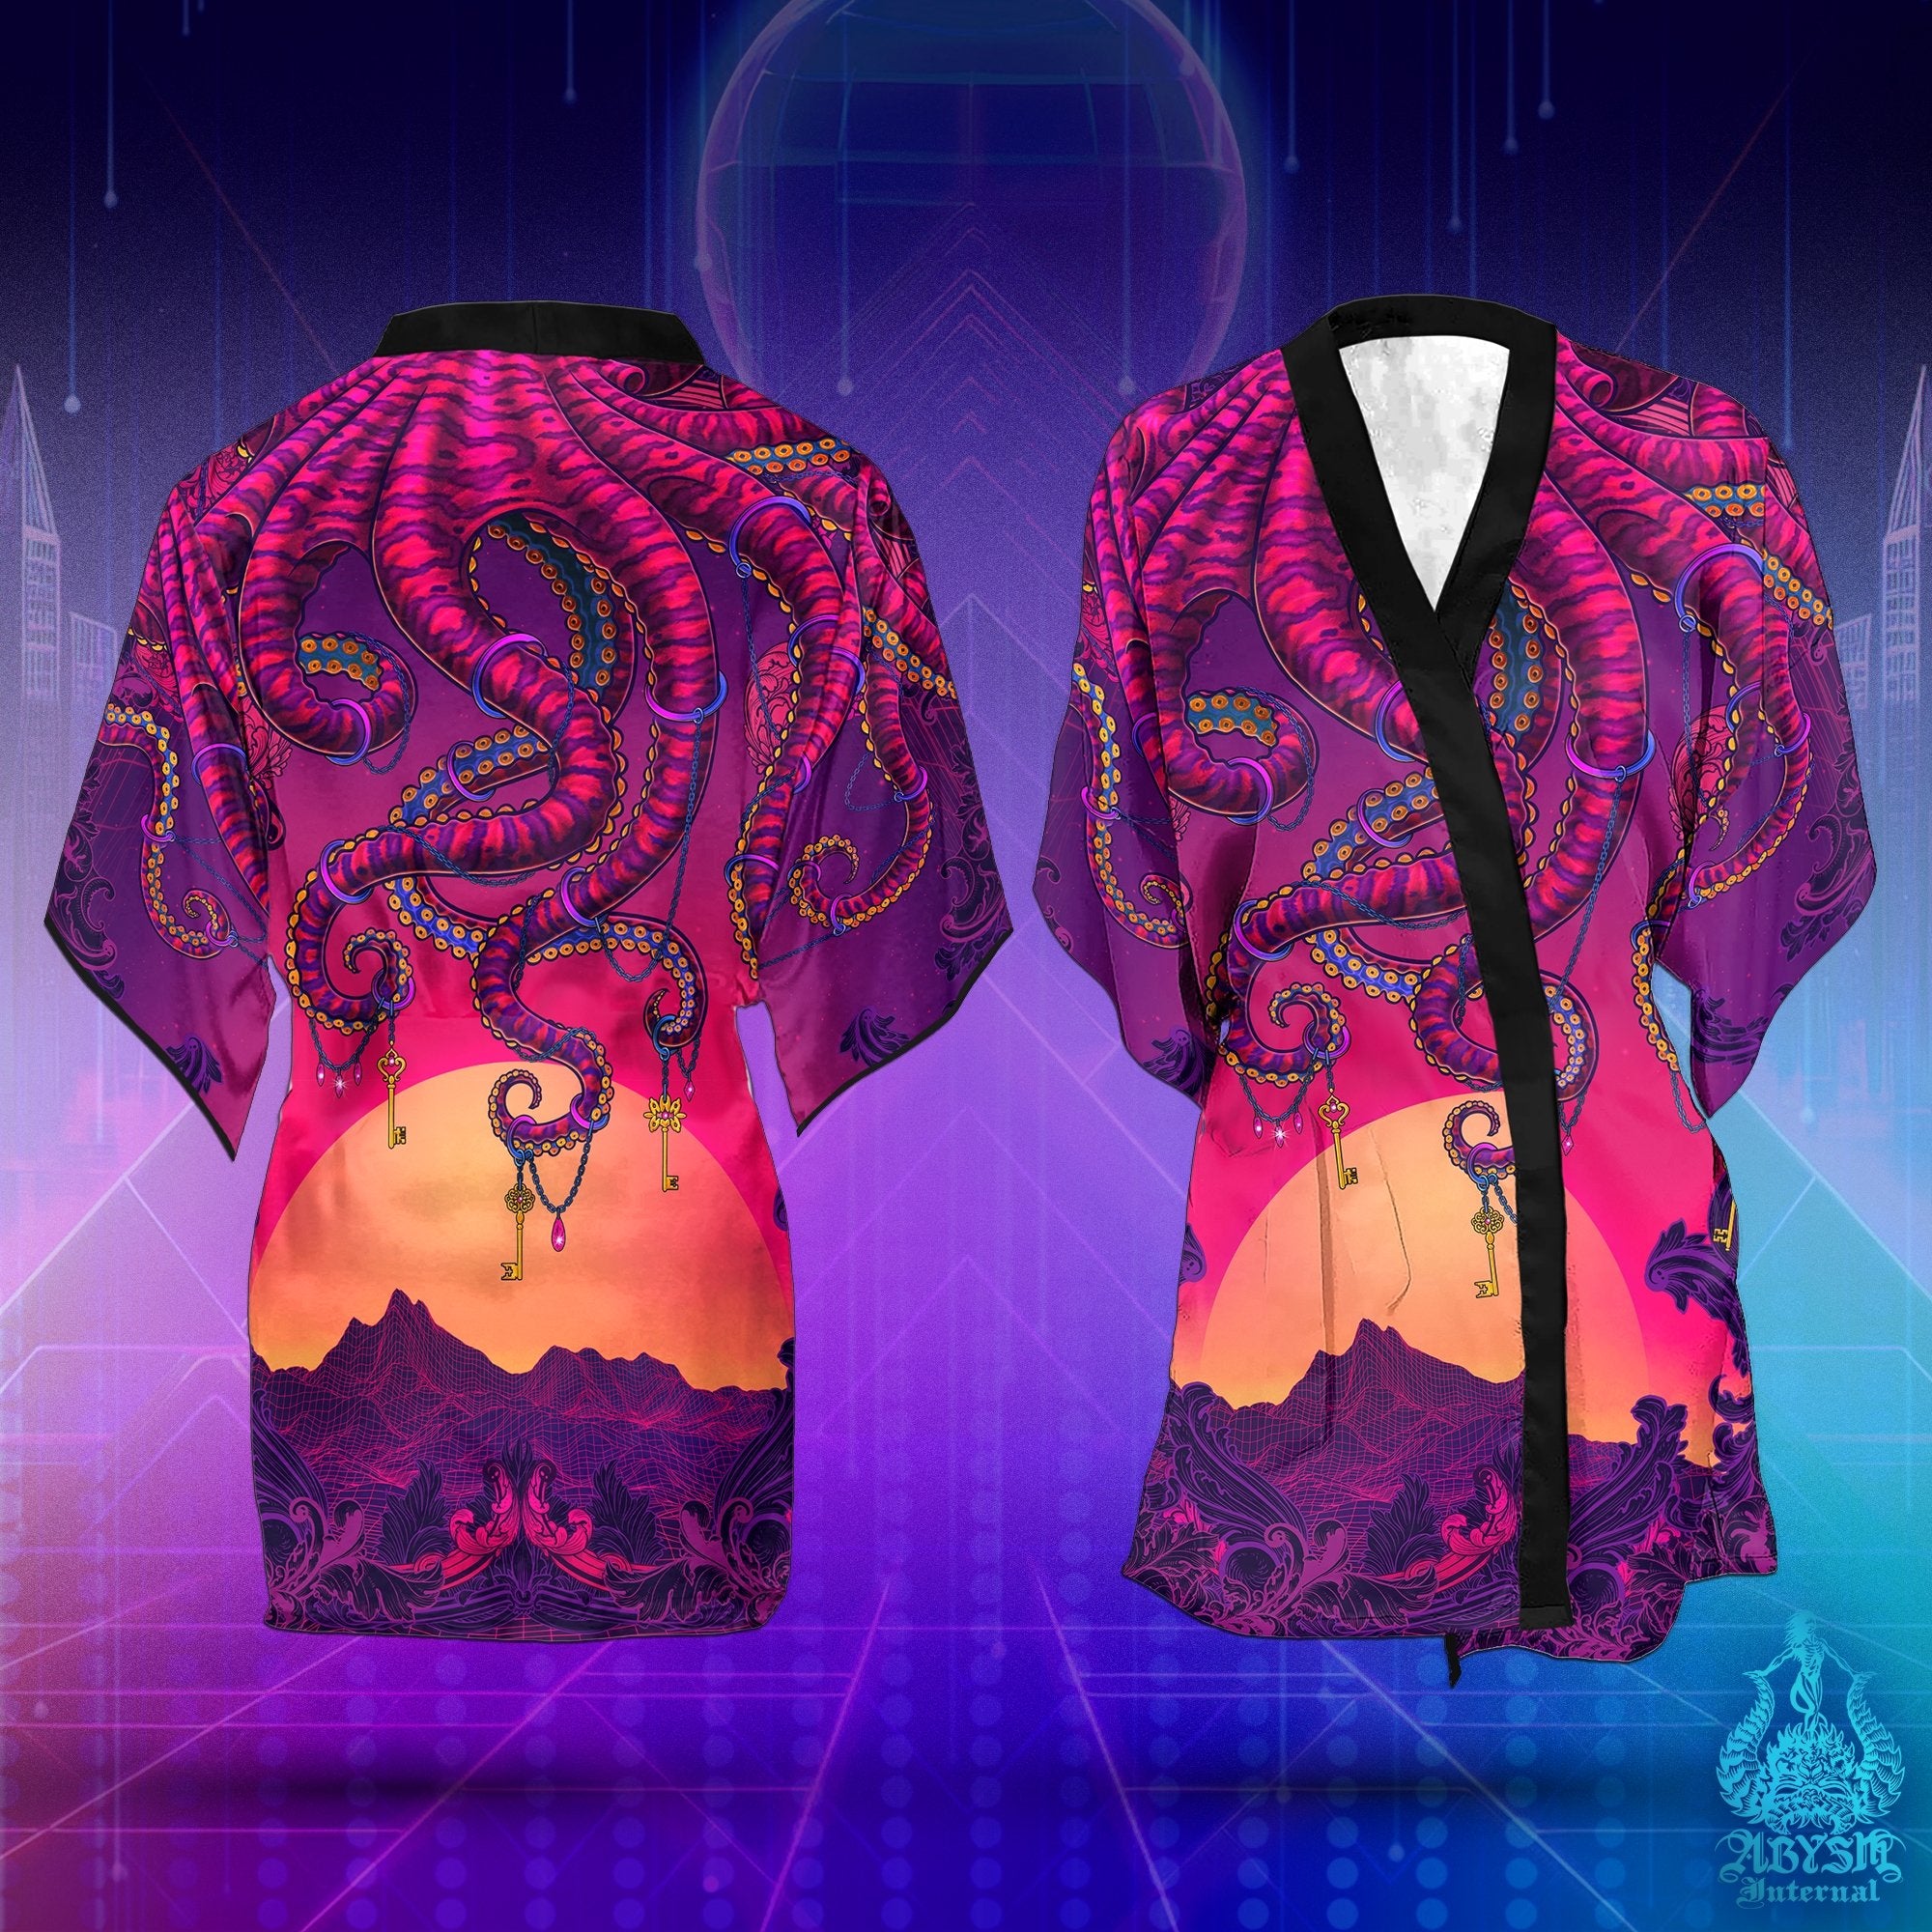 Vaporwave Cover Up, Synthwave Outfit, Retrowave Party Kimono, Summer Festival Robe, 80s Art, Alternative Beach Clothing, Unisex - Octopus - Abysm Internal